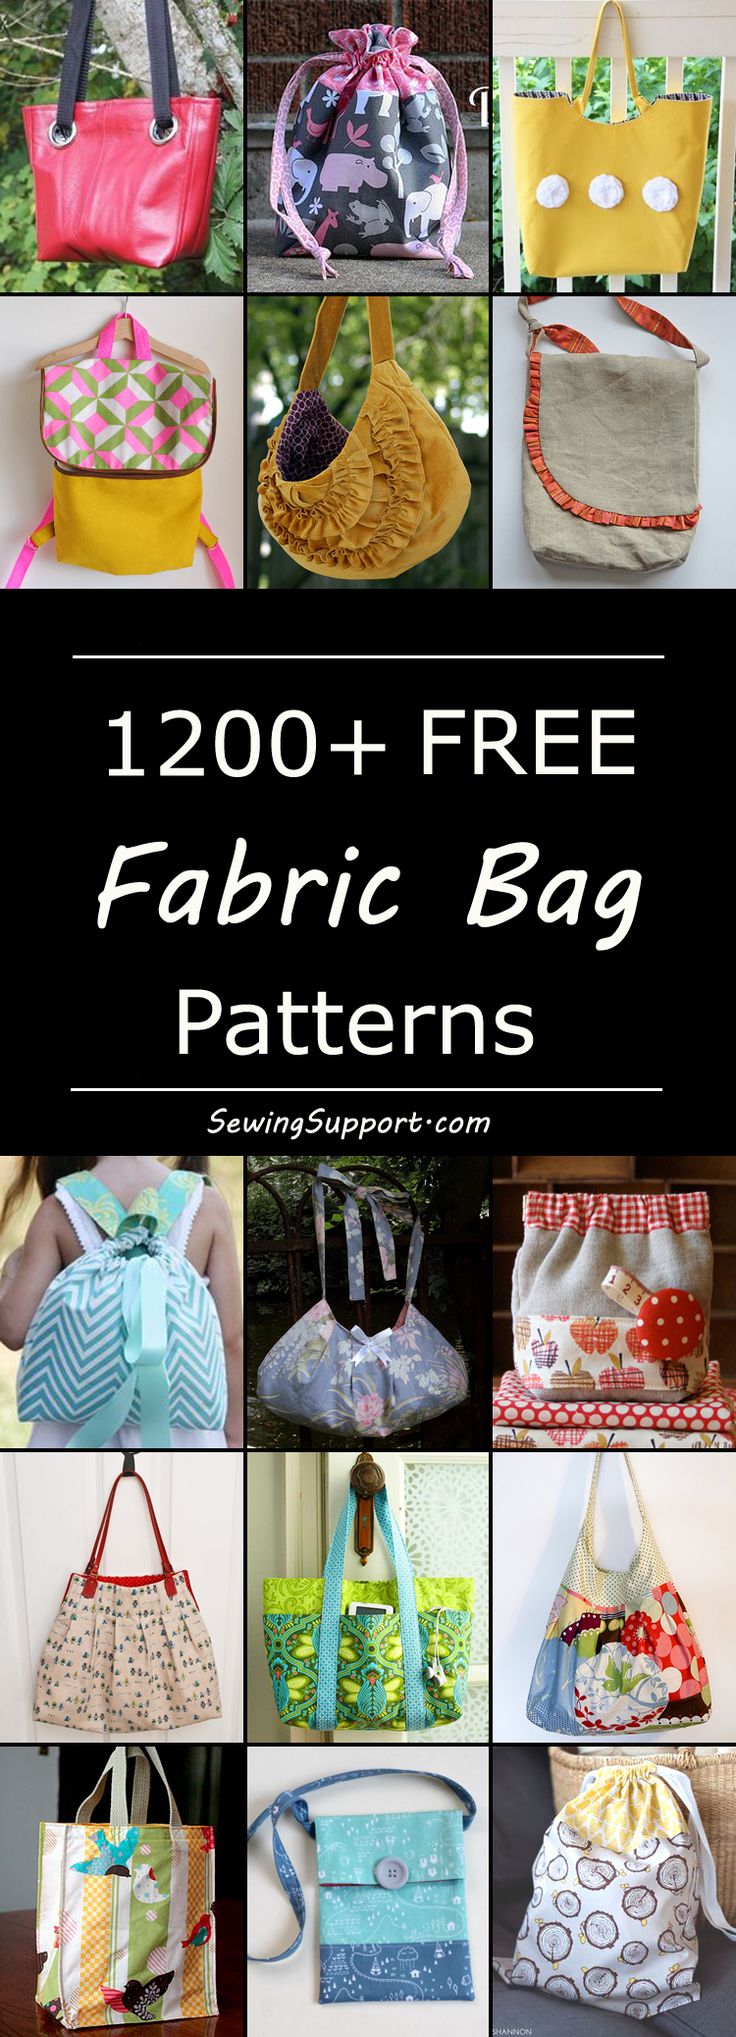 Lots of free bag sewing patterns, diy projects, and tutorials. Sew messenger bag...